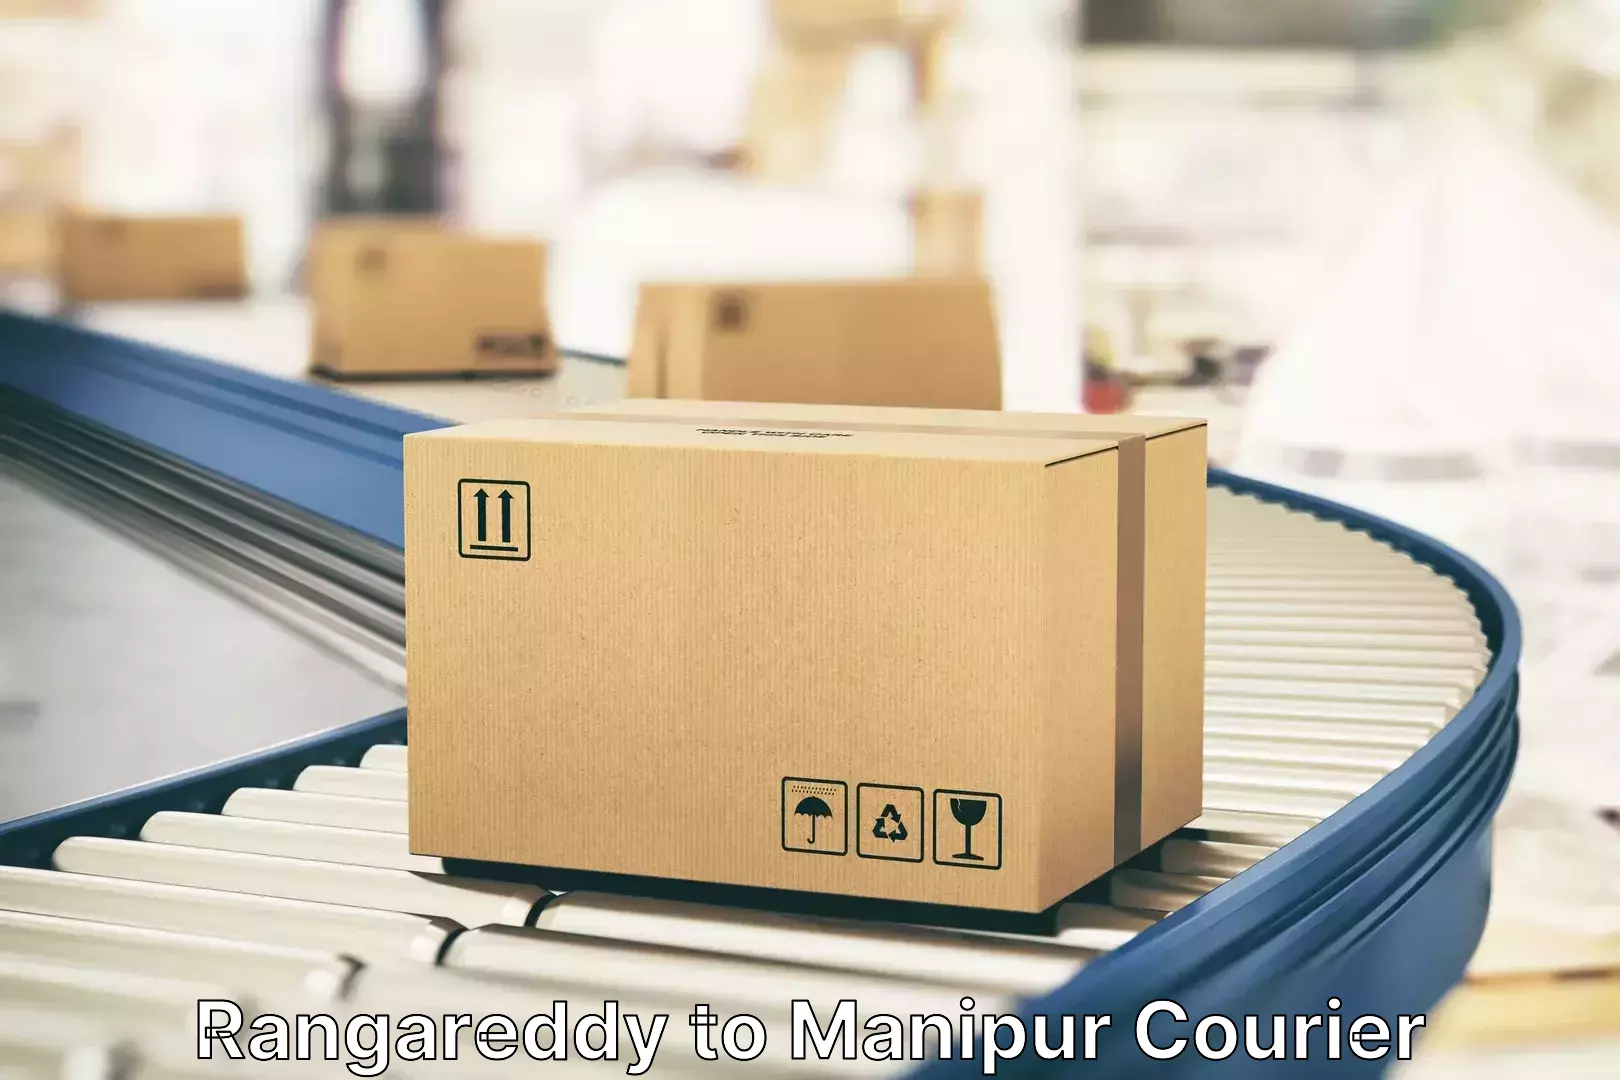 Baggage delivery scheduling Rangareddy to Manipur